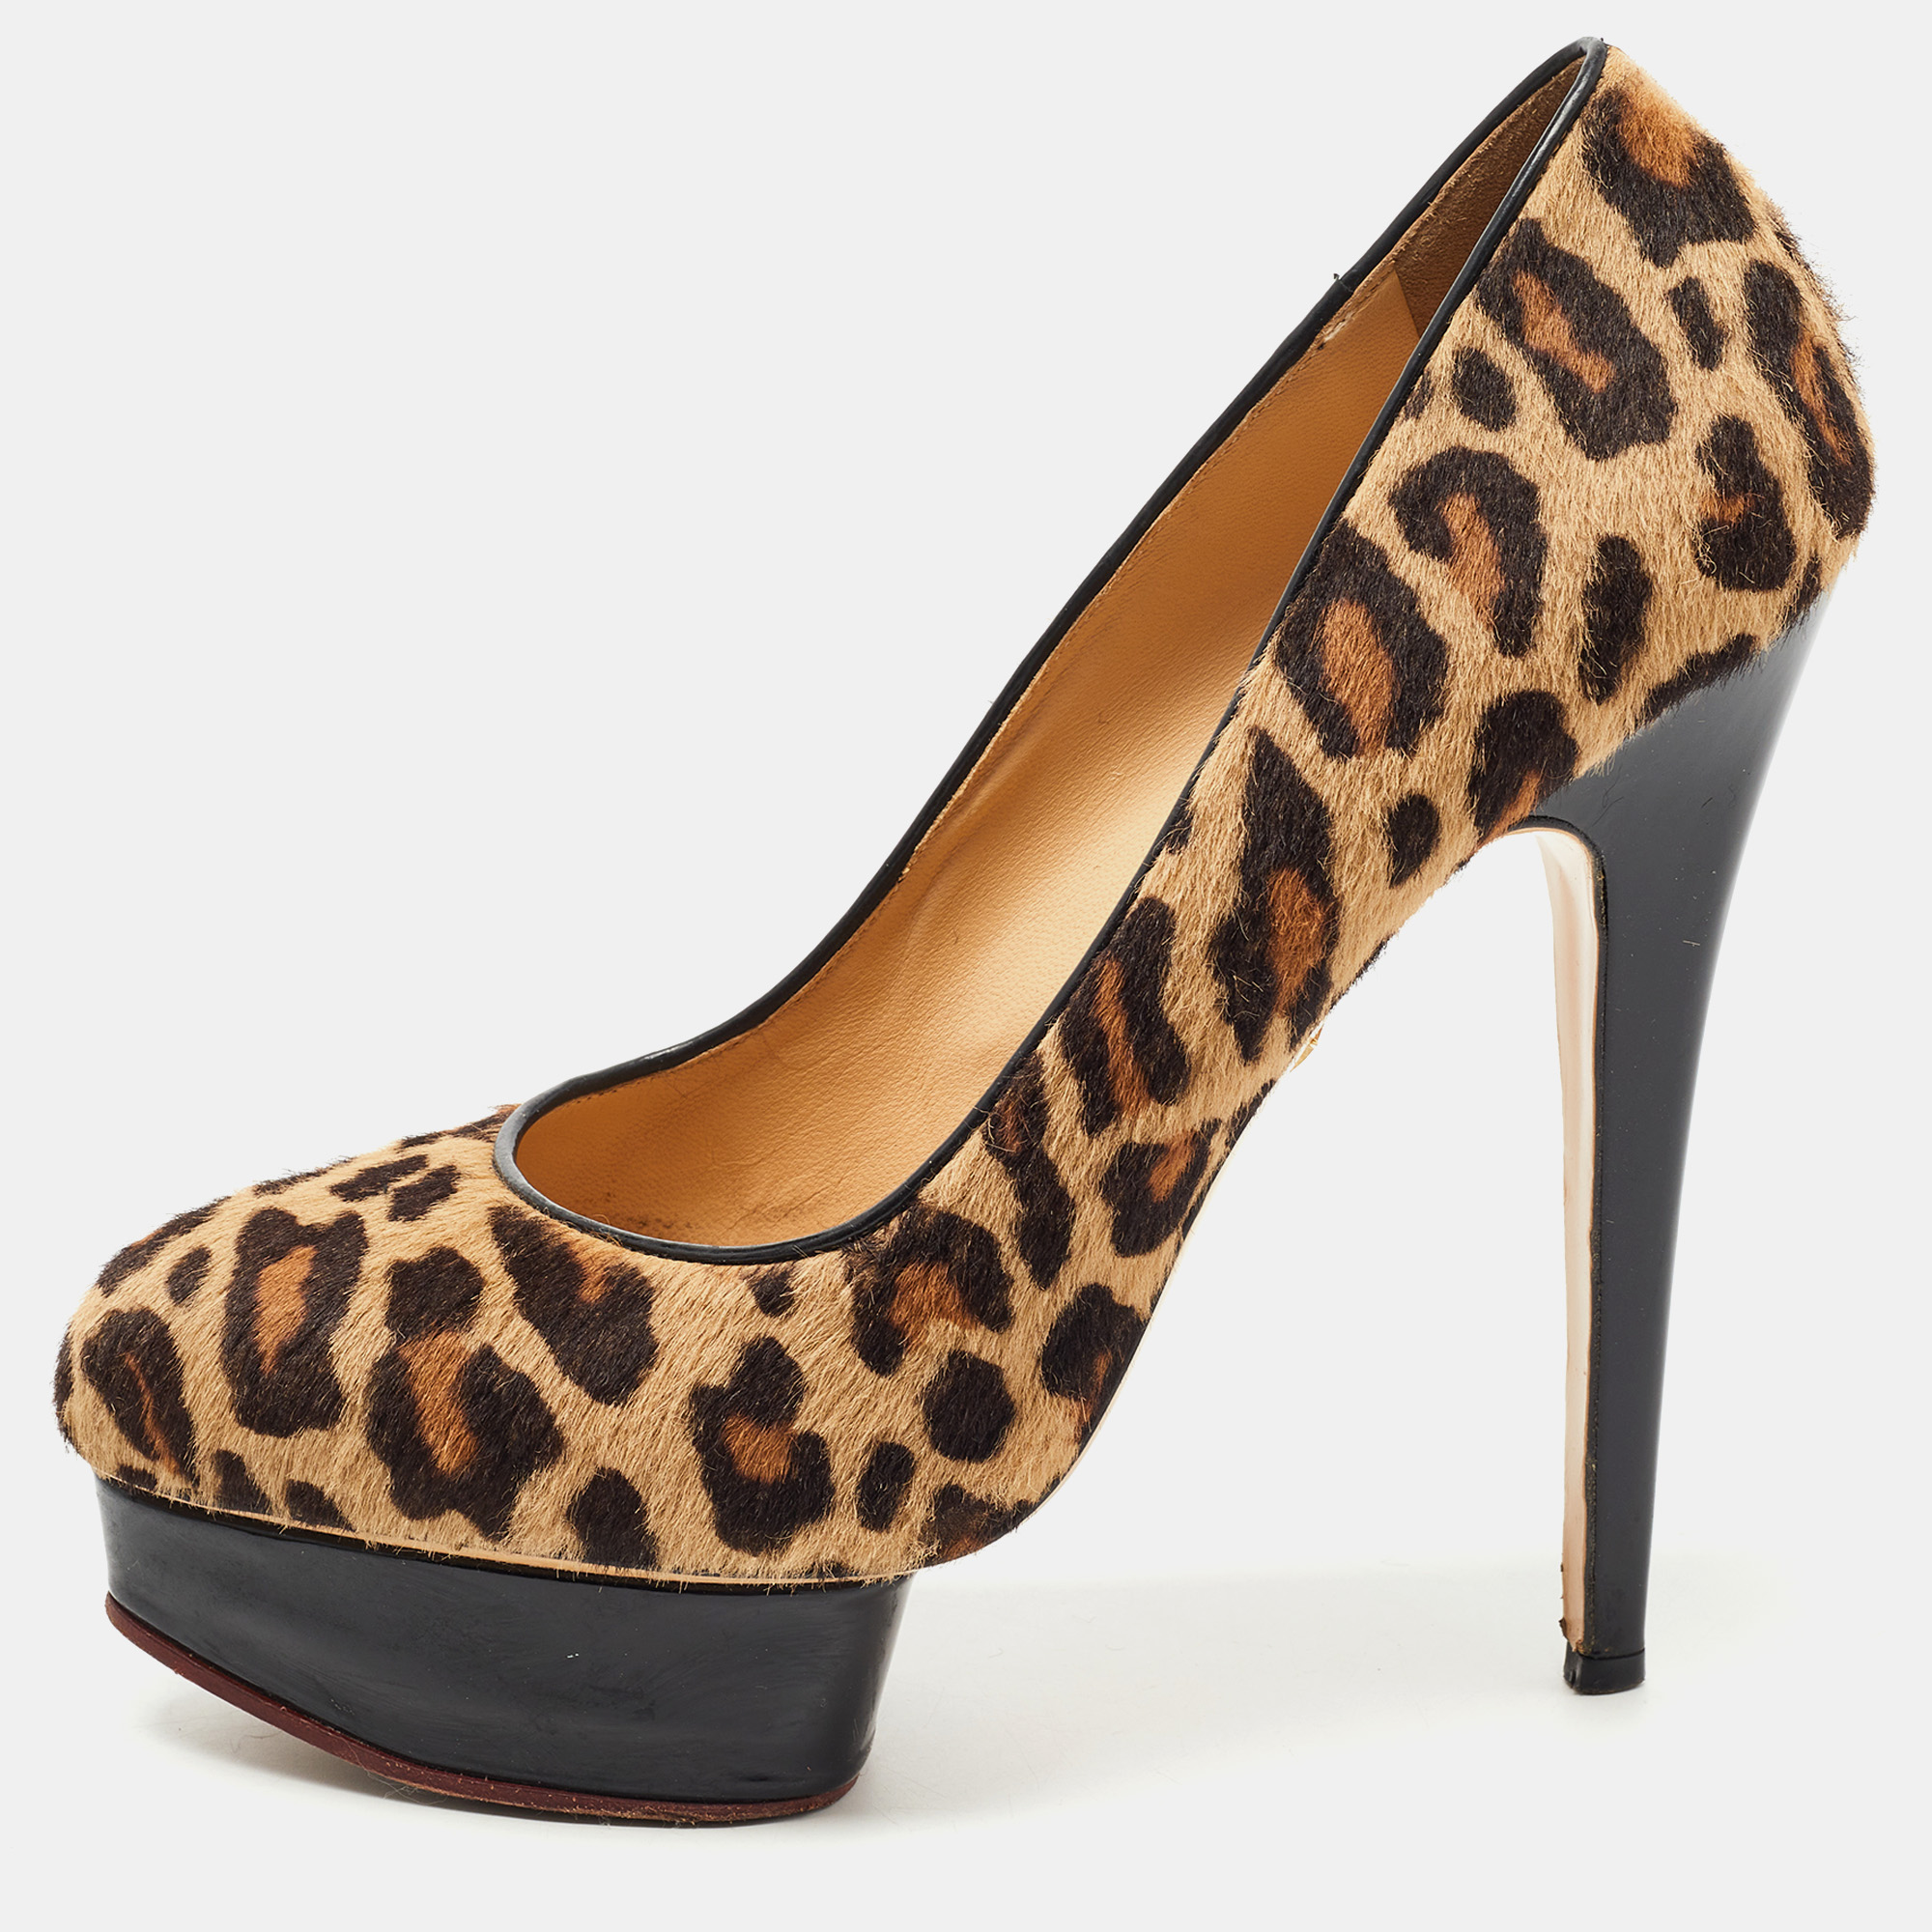 

Charlotte Olympia Brown/Beige Leopard Print Calf Hair Dolly Platform Pumps Size